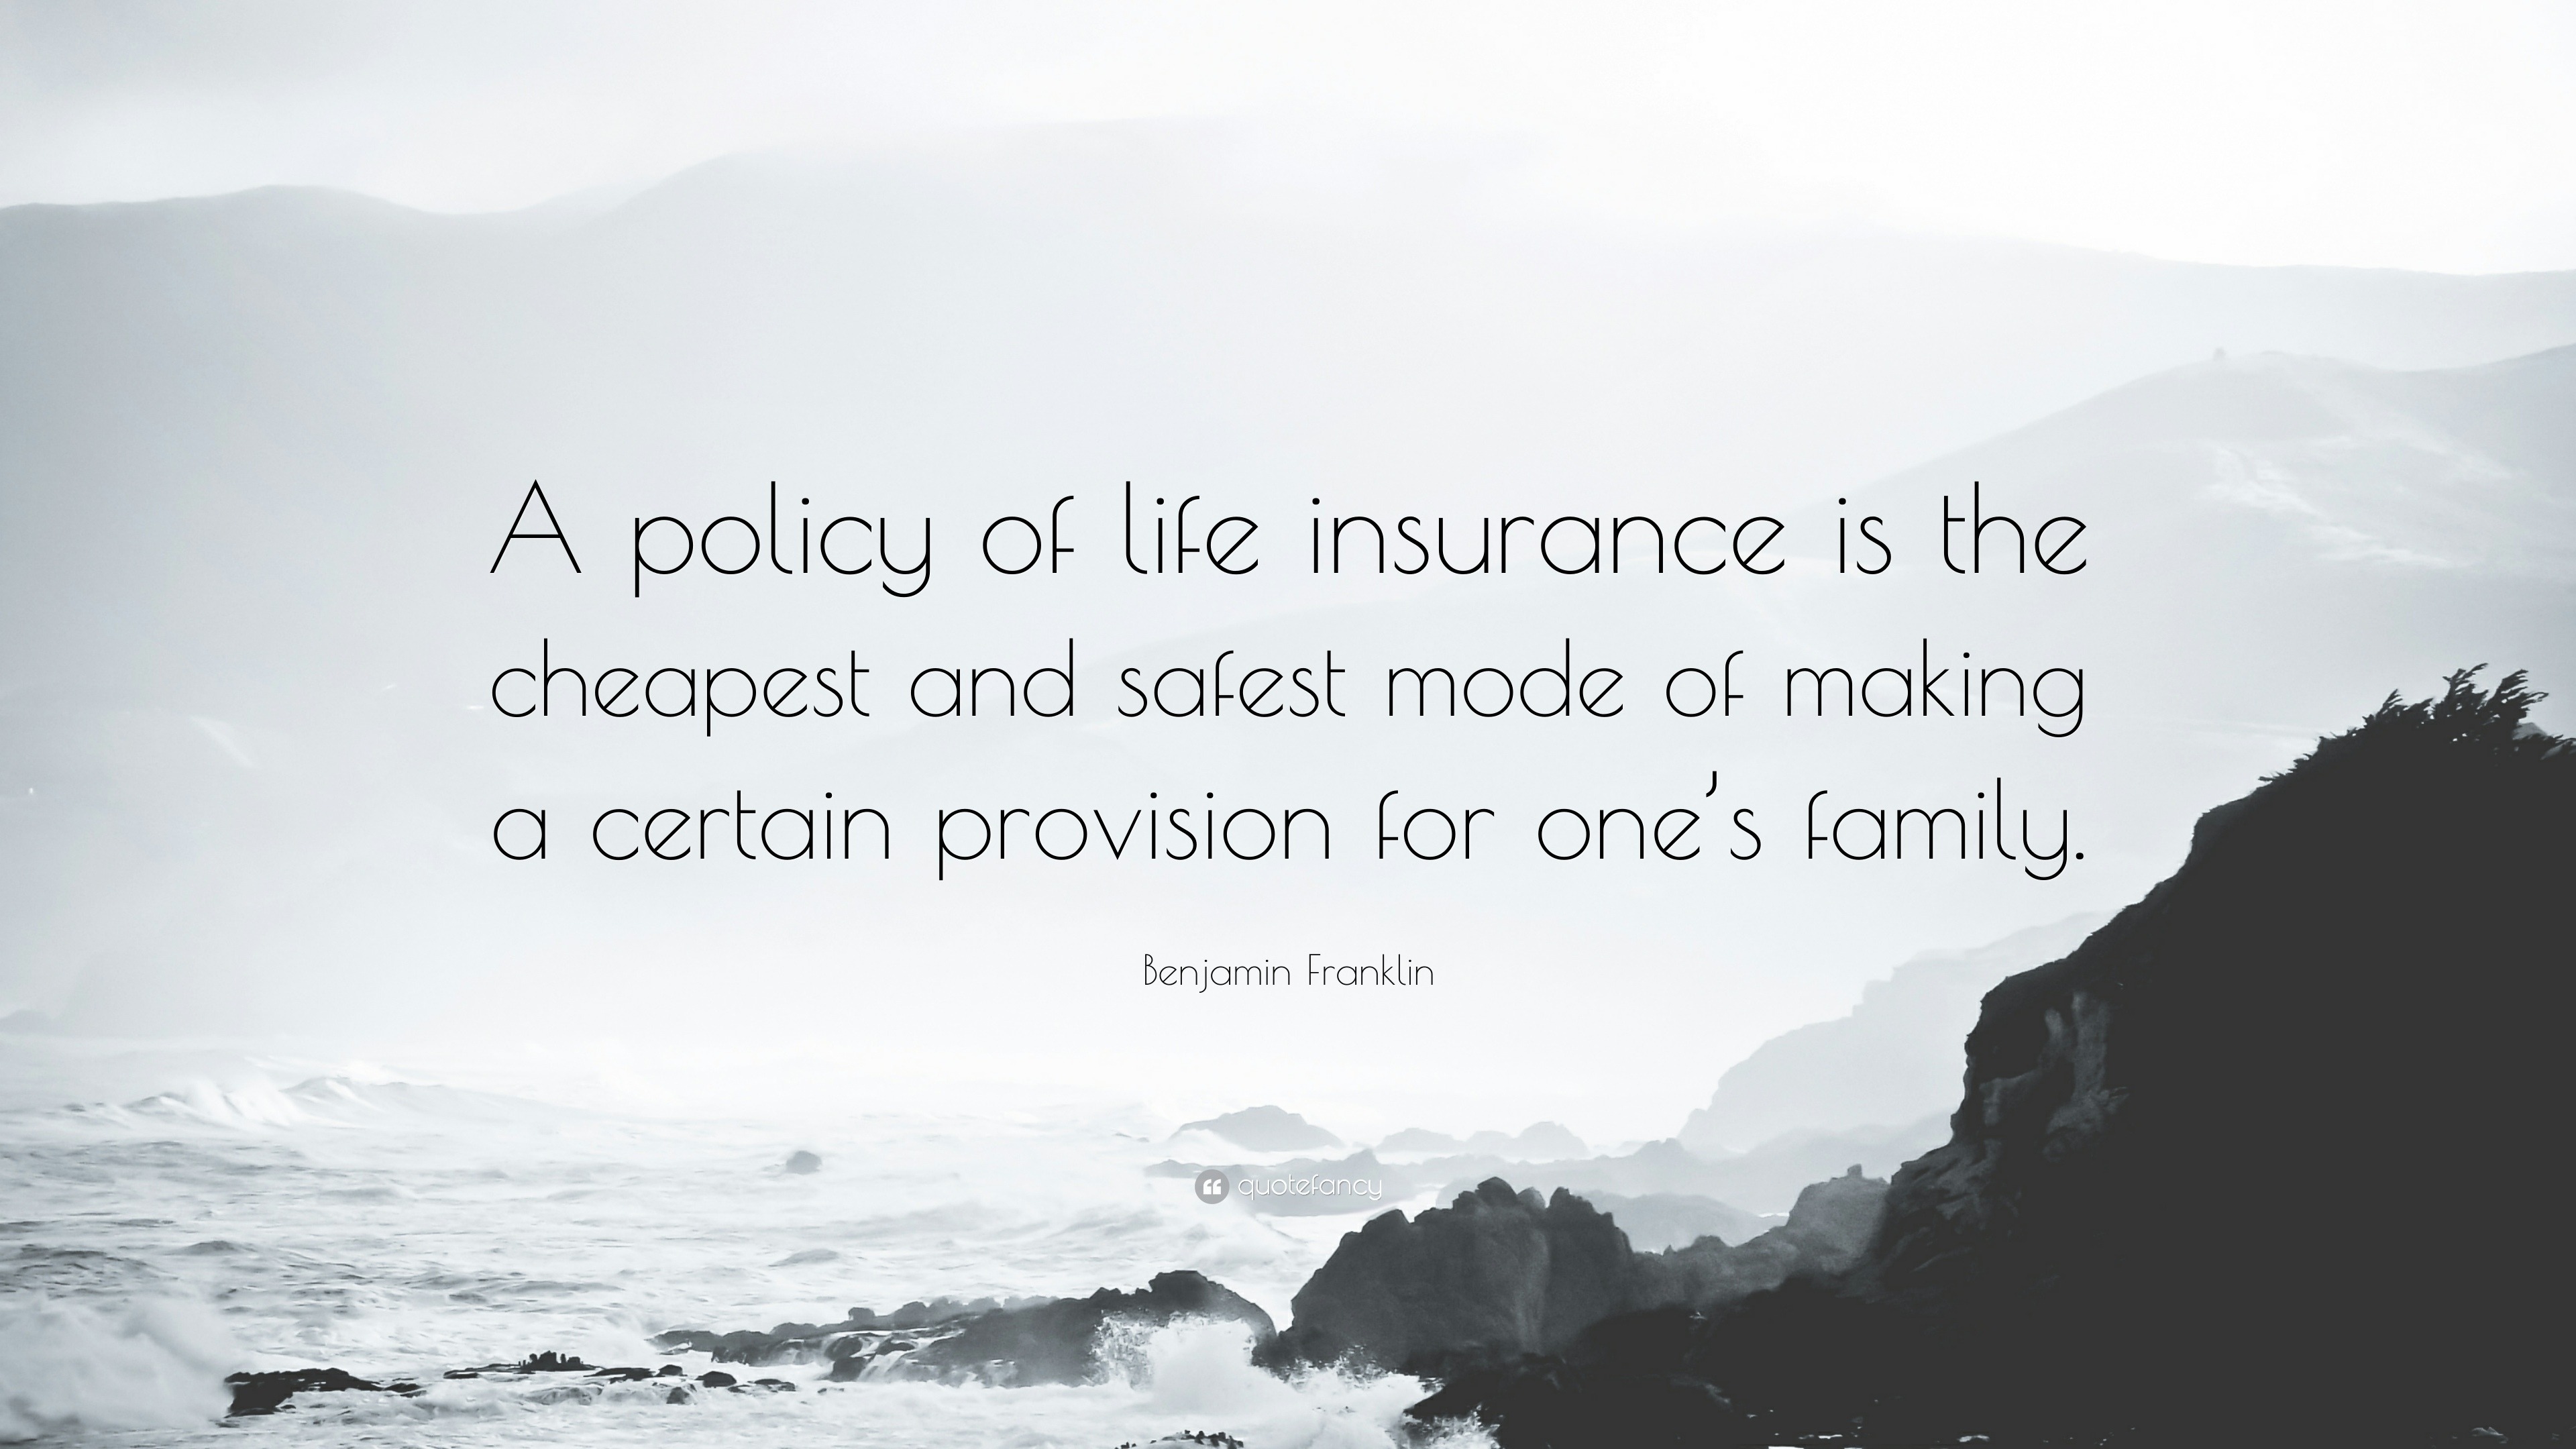 Benjamin Franklin Quote: “A policy of life insurance is the